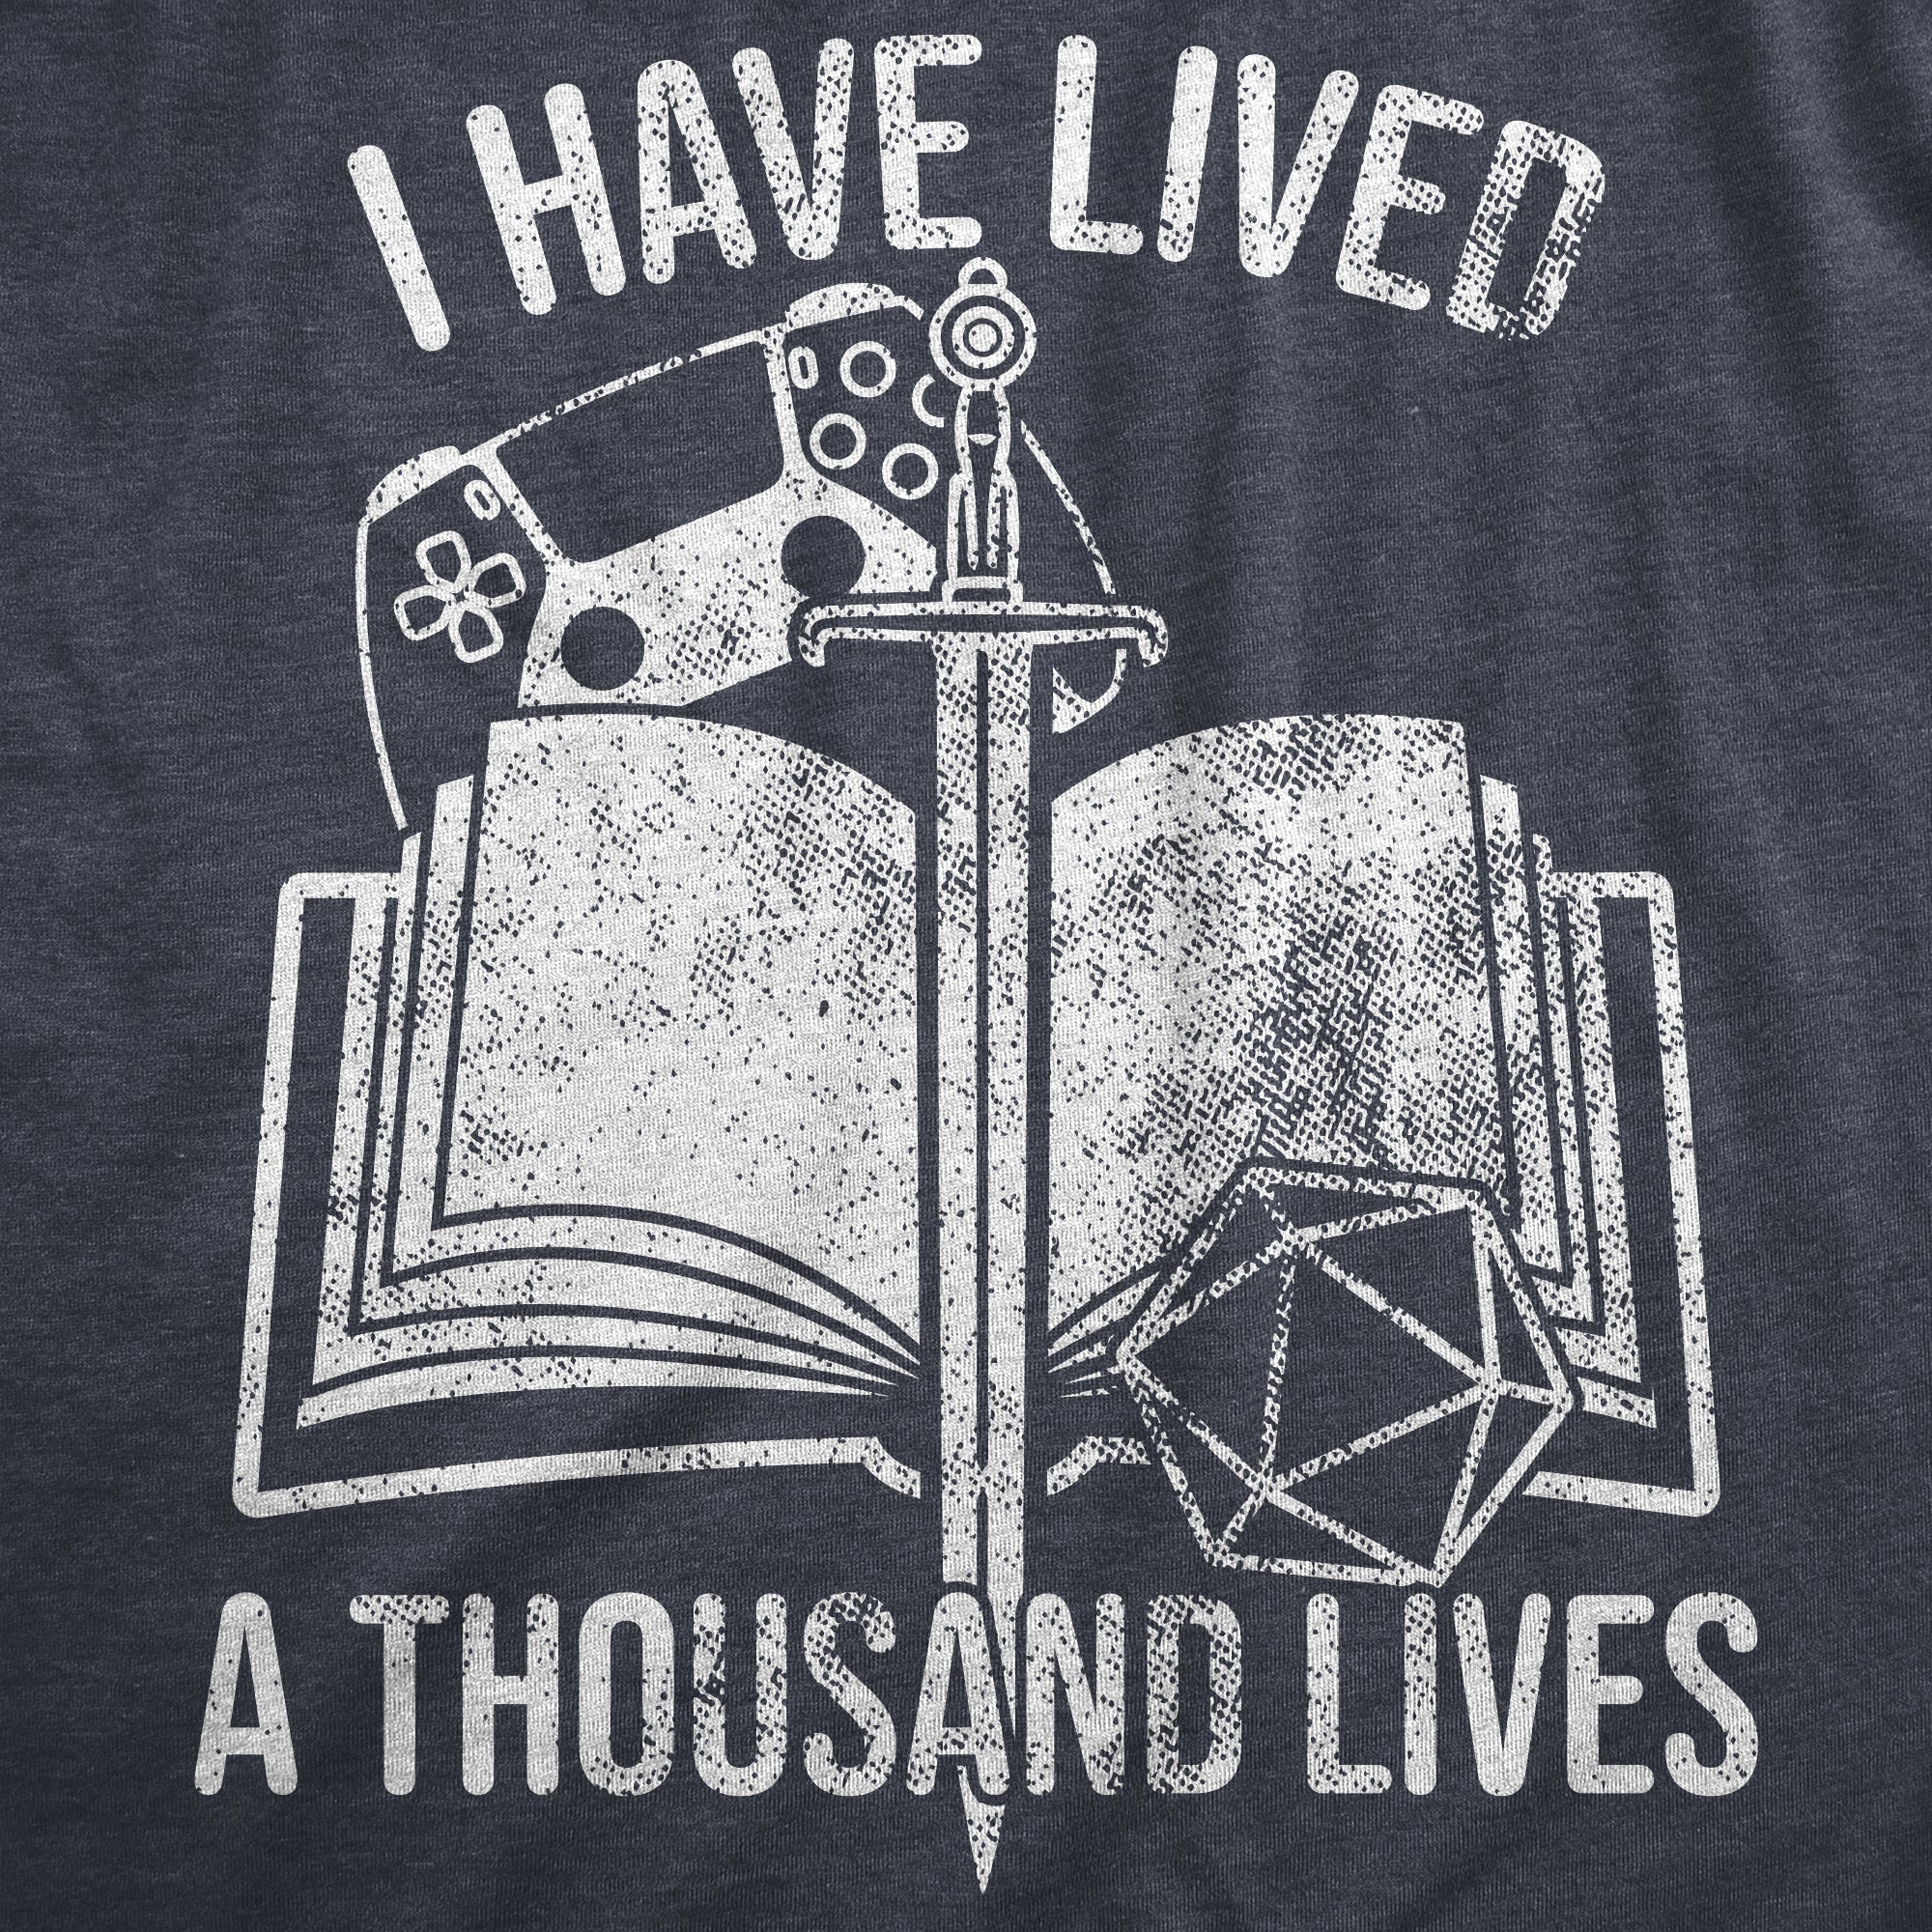 Funny Heather Navy - LIVES I Have Lived A Thousand Lives Womens T Shirt Nerdy Video Games Nerdy Tee